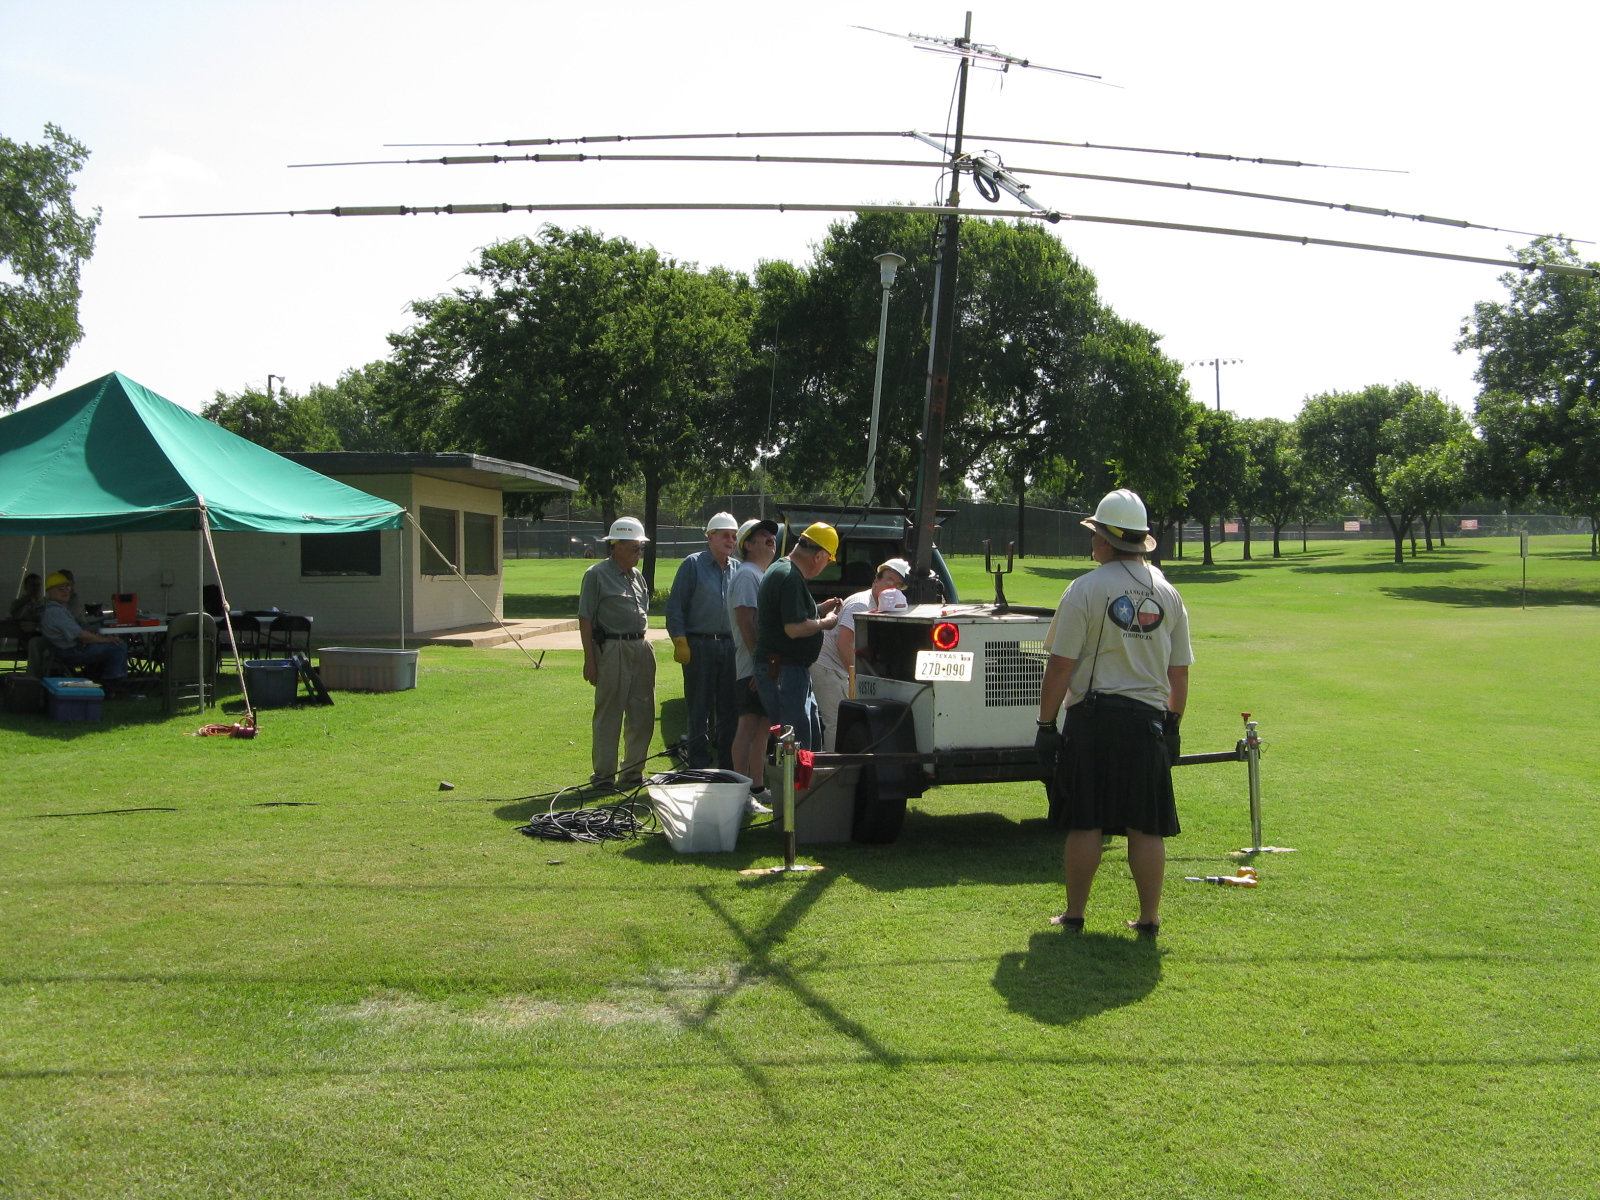 Setting up the antenna mast with two beams